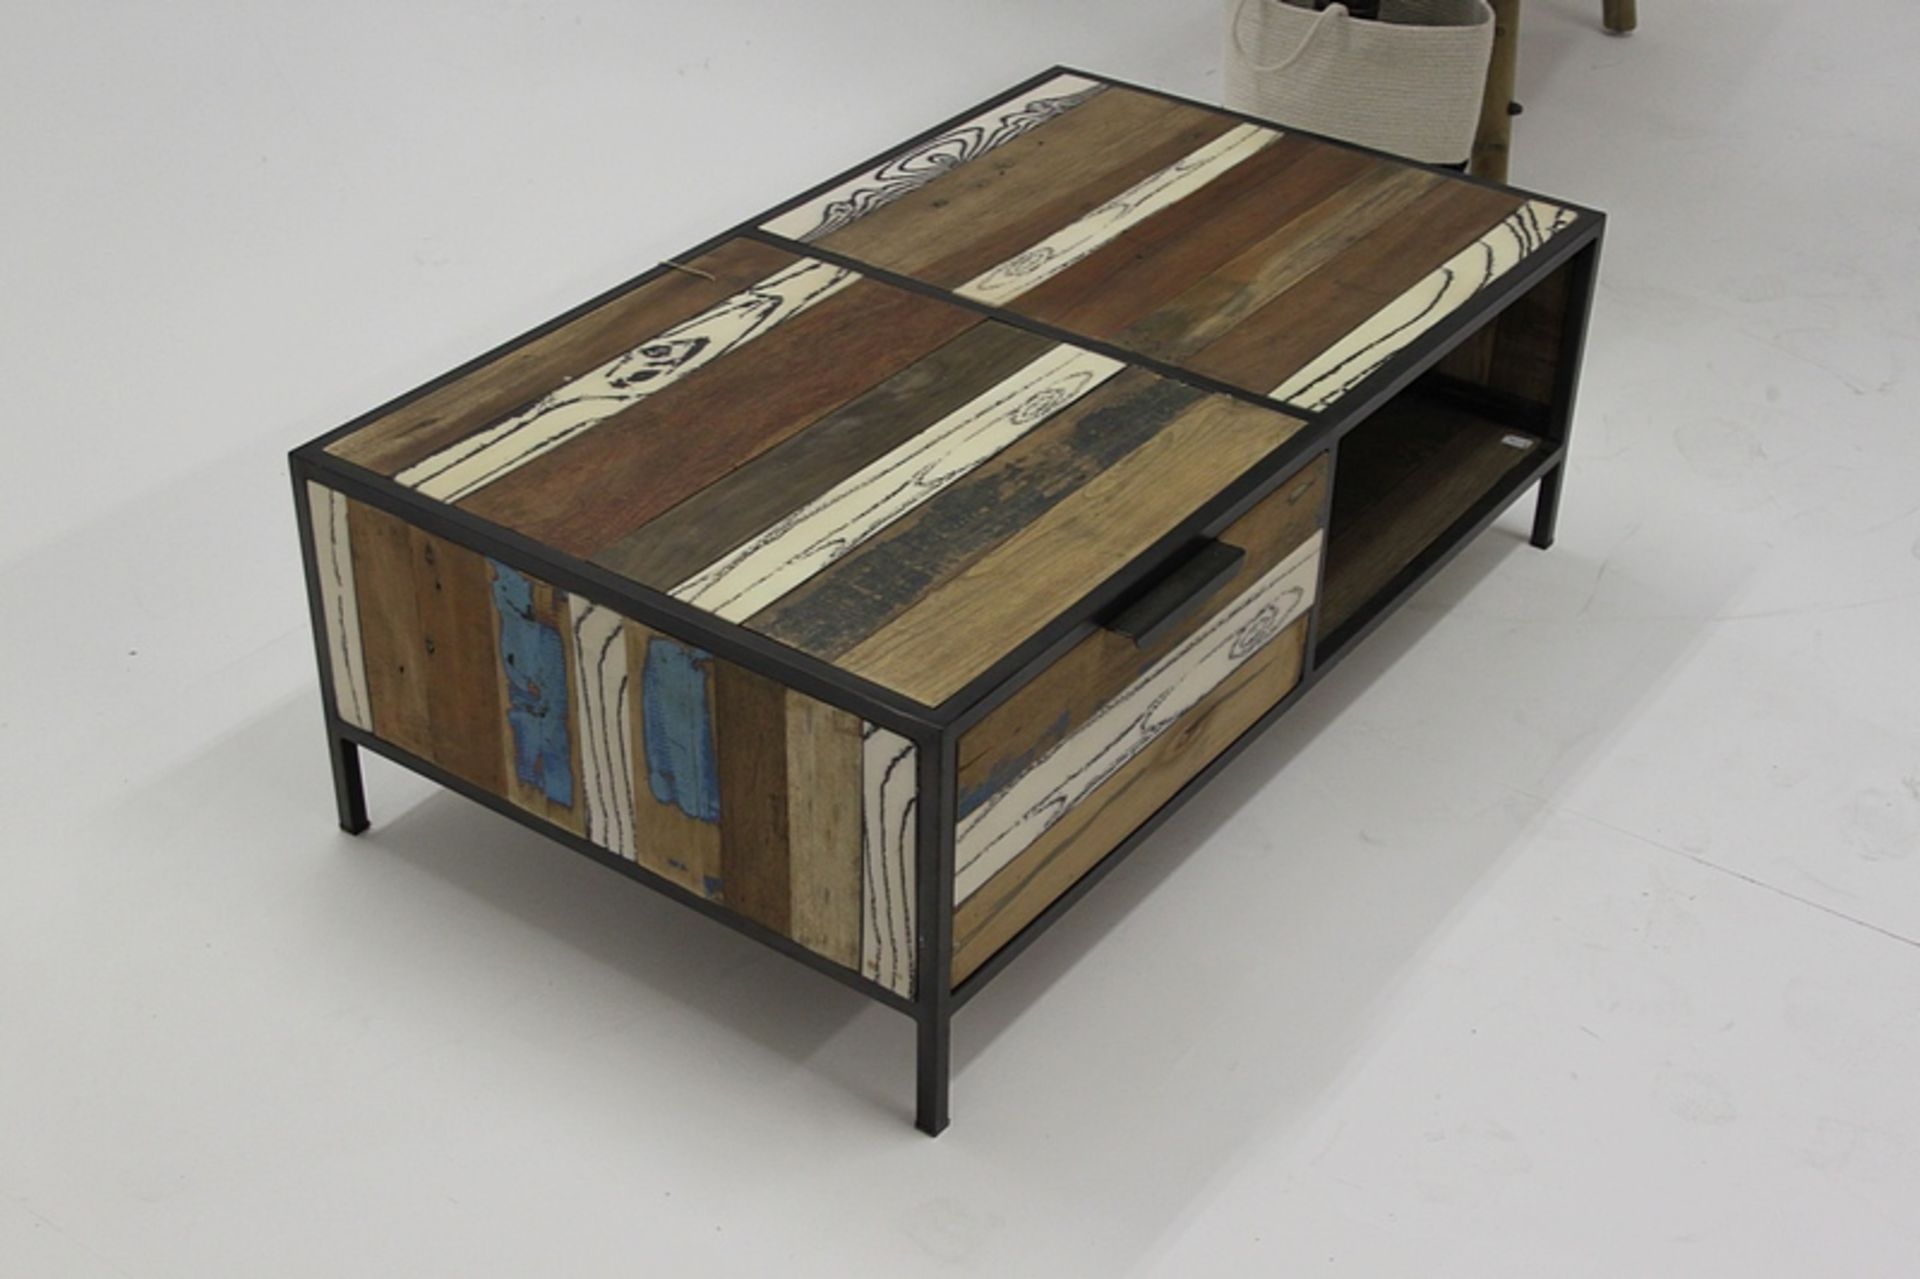 Bluebone Titanic Evolve Coffee Table With 2 Drawers Reclaimed Timbers Iron And White Faux Timber